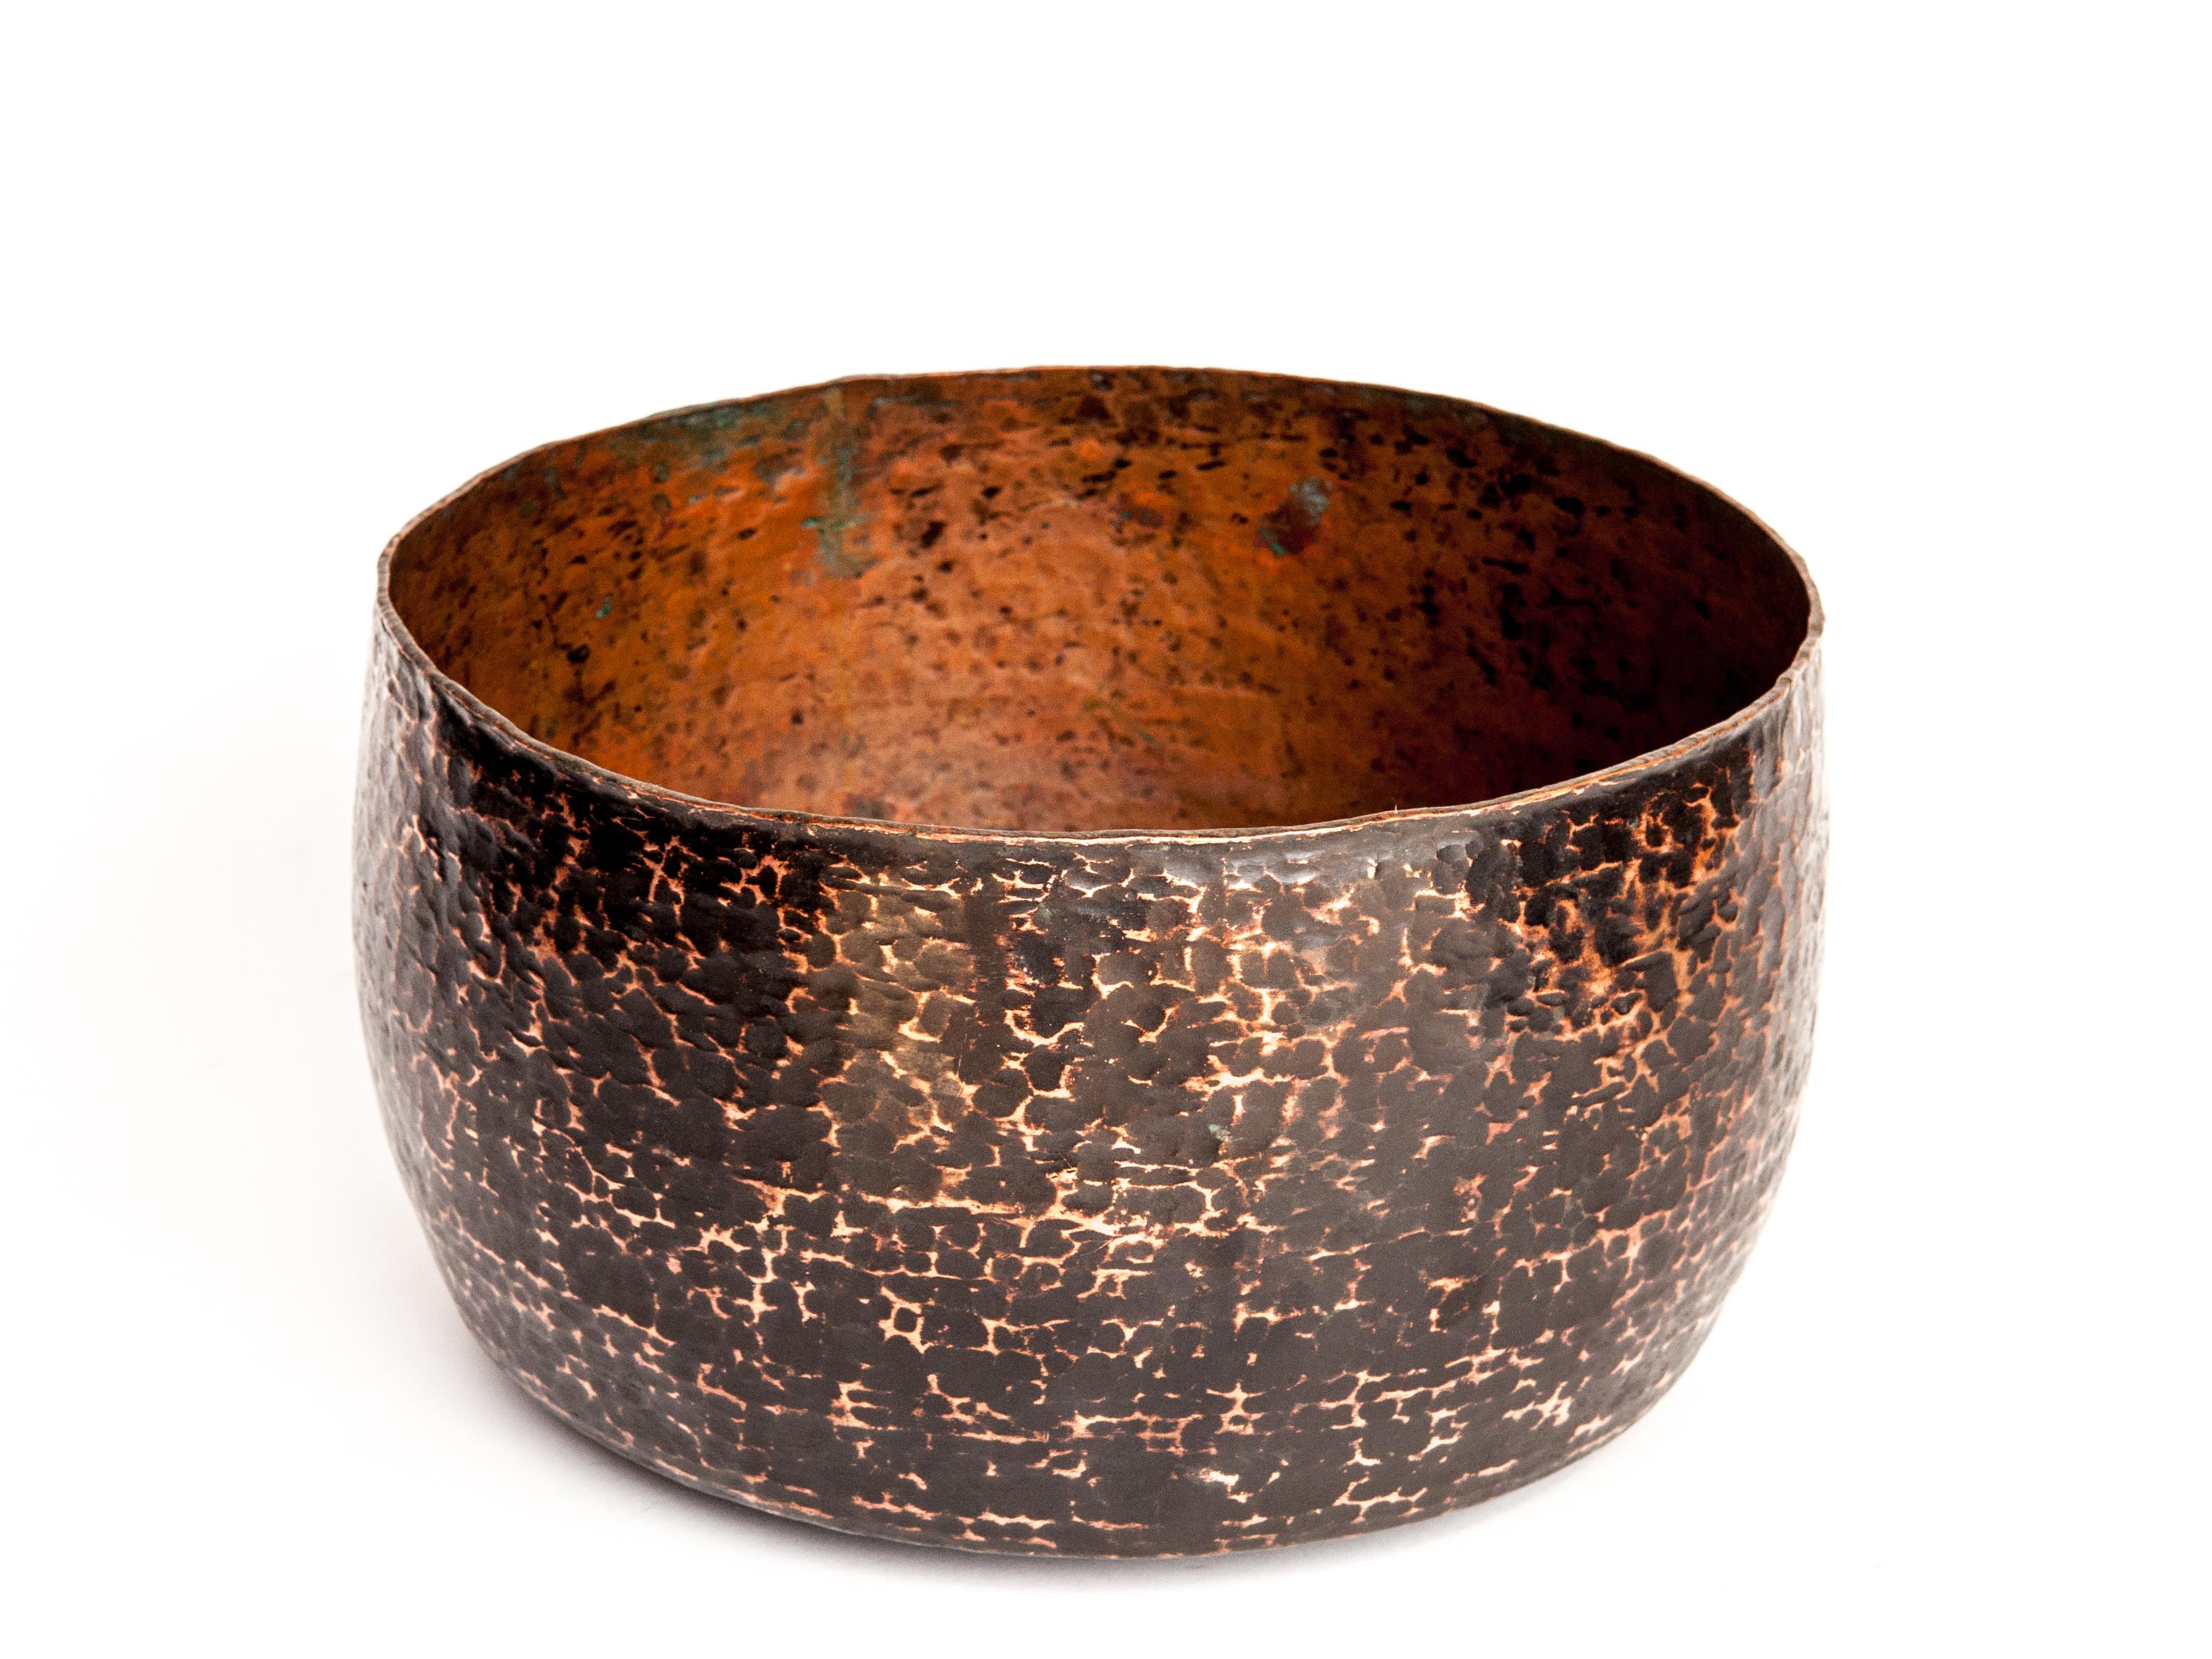 Metalwork Vintage Copper Bowl from the Nepal Himal, Mid-20th Century